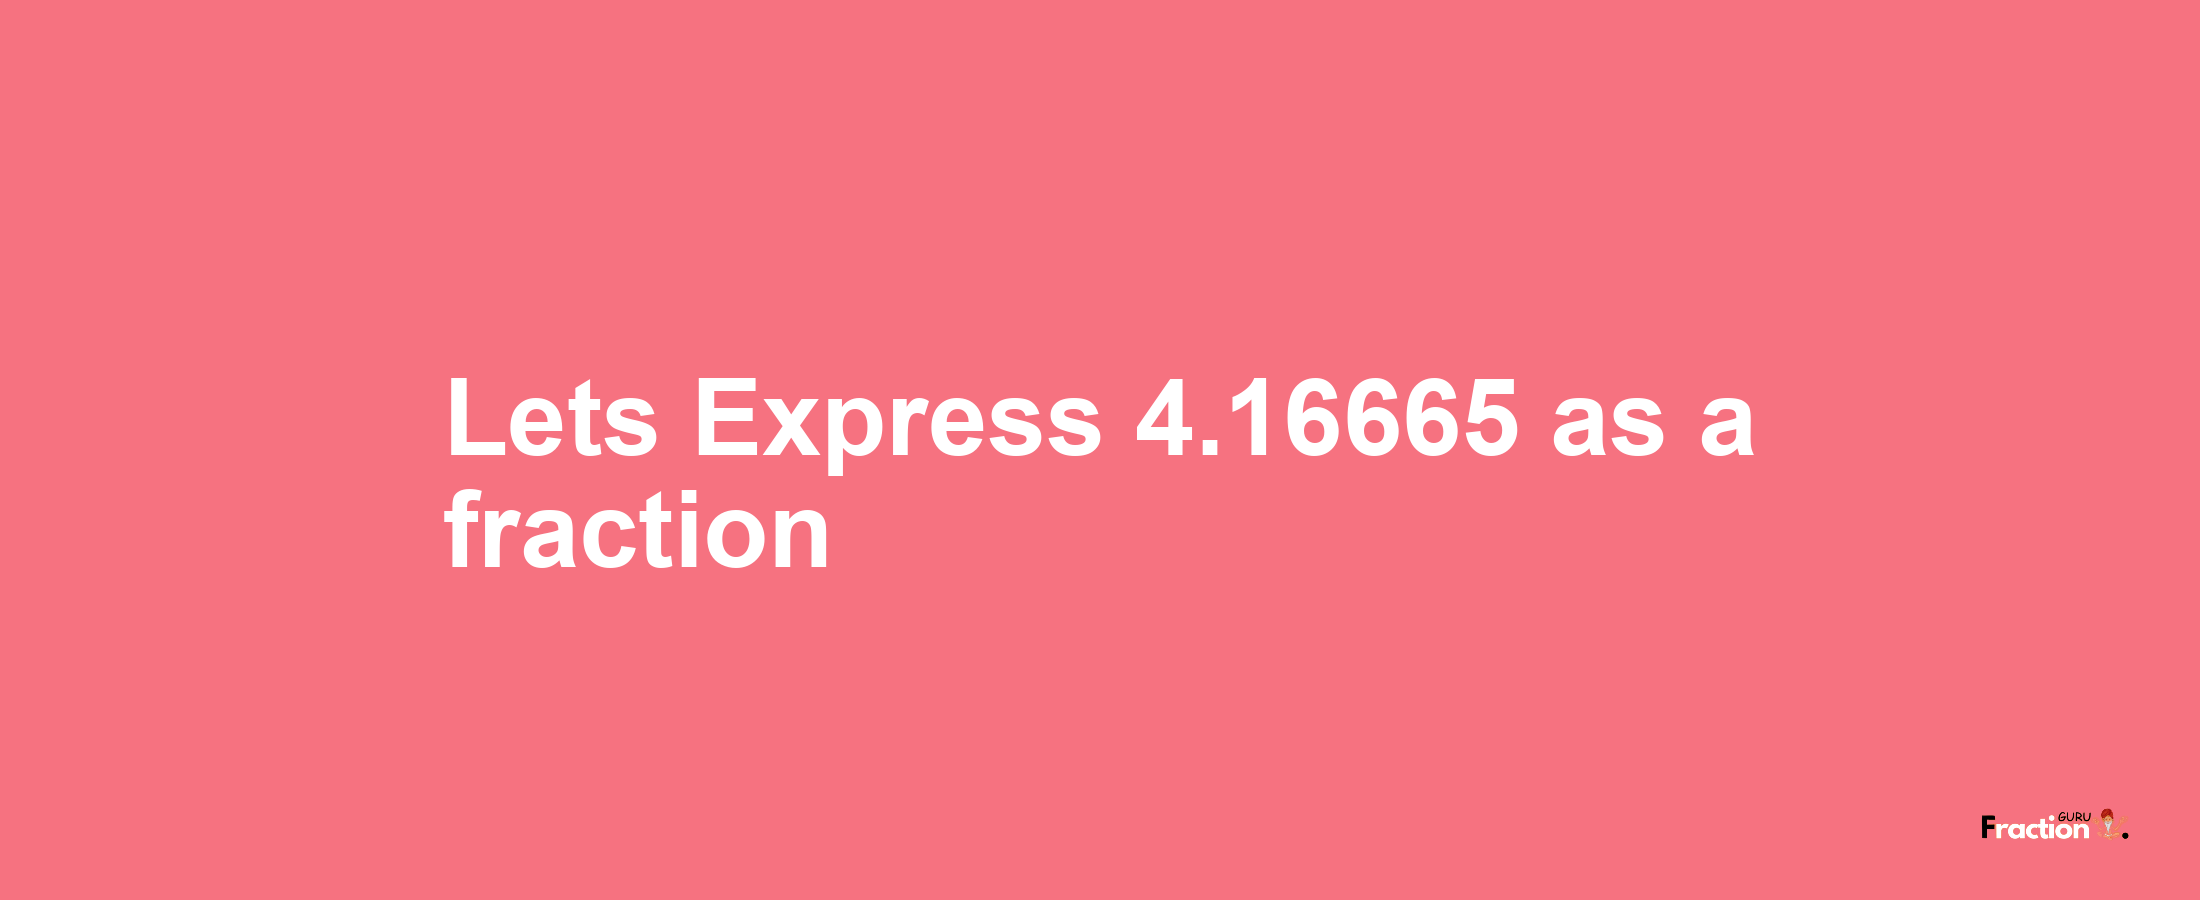 Lets Express 4.16665 as afraction